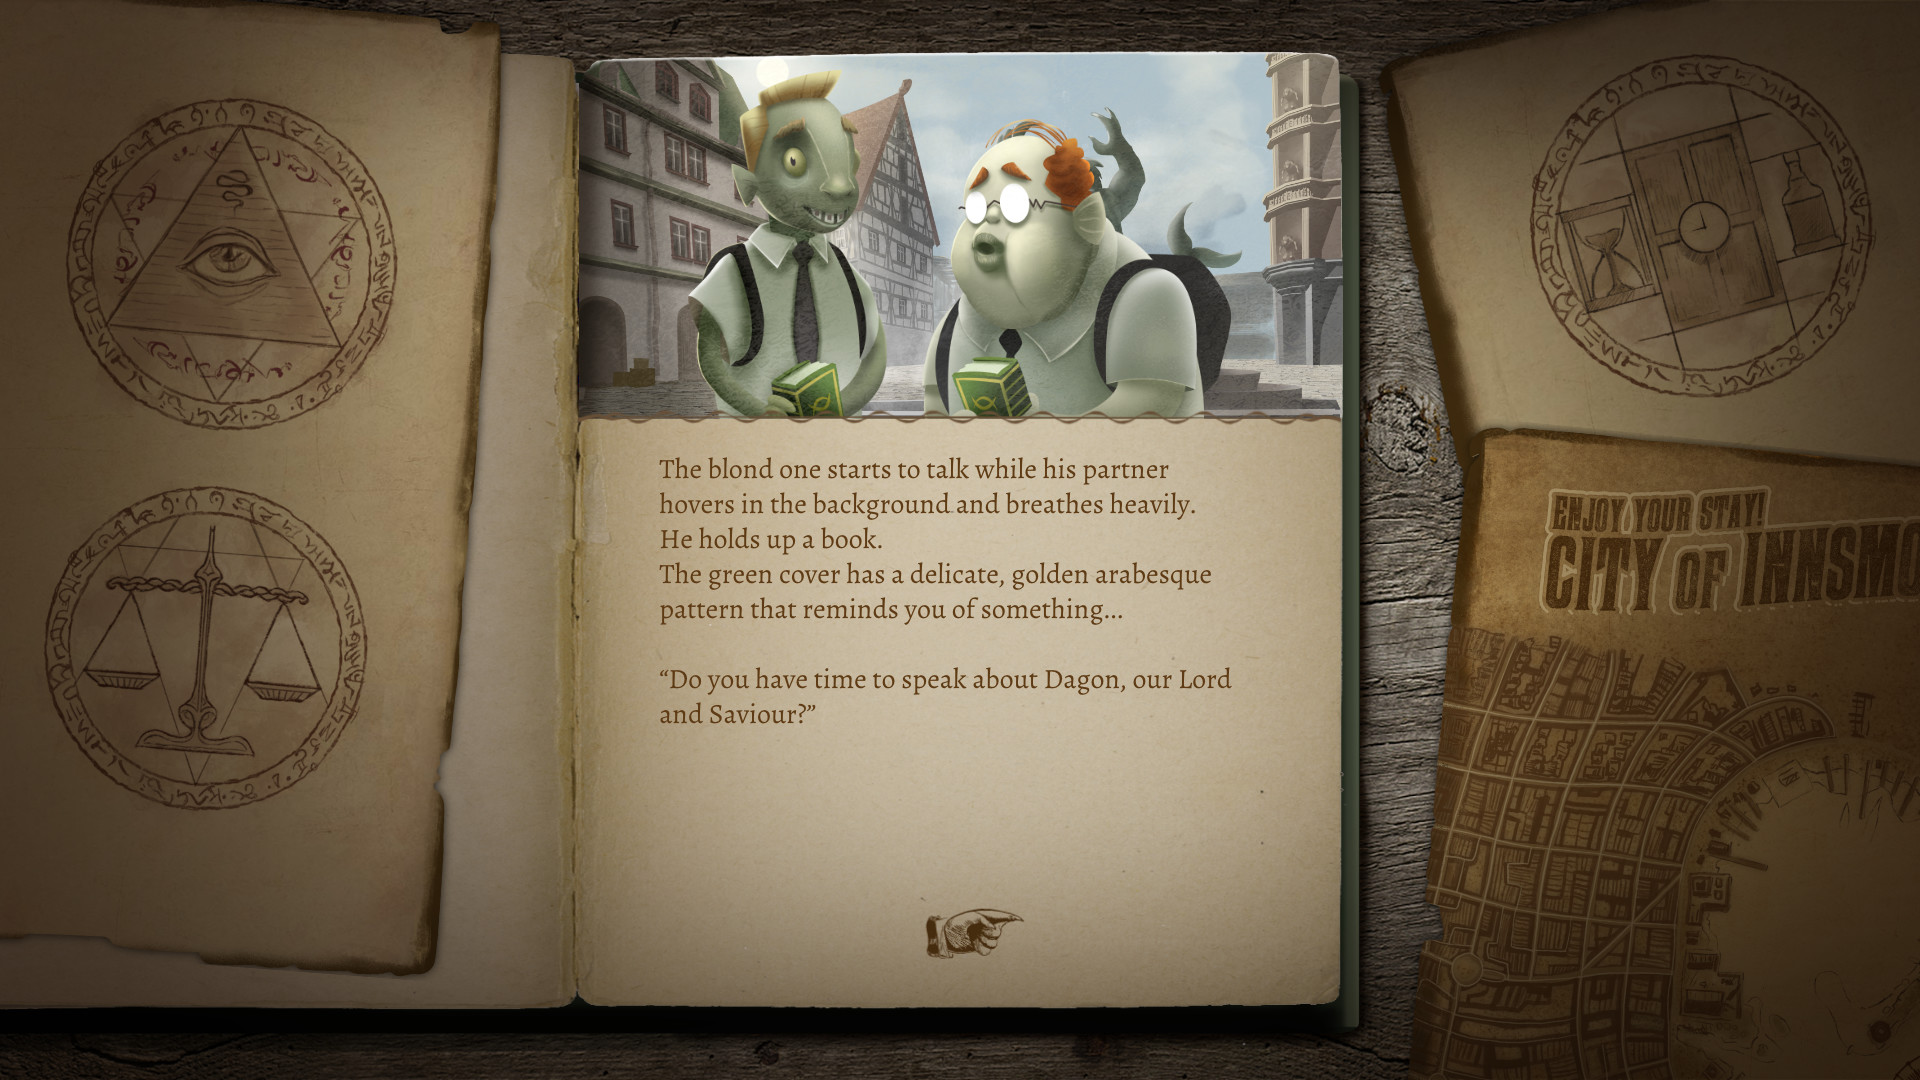 The Innsmouth Case is heading for iOS and Android